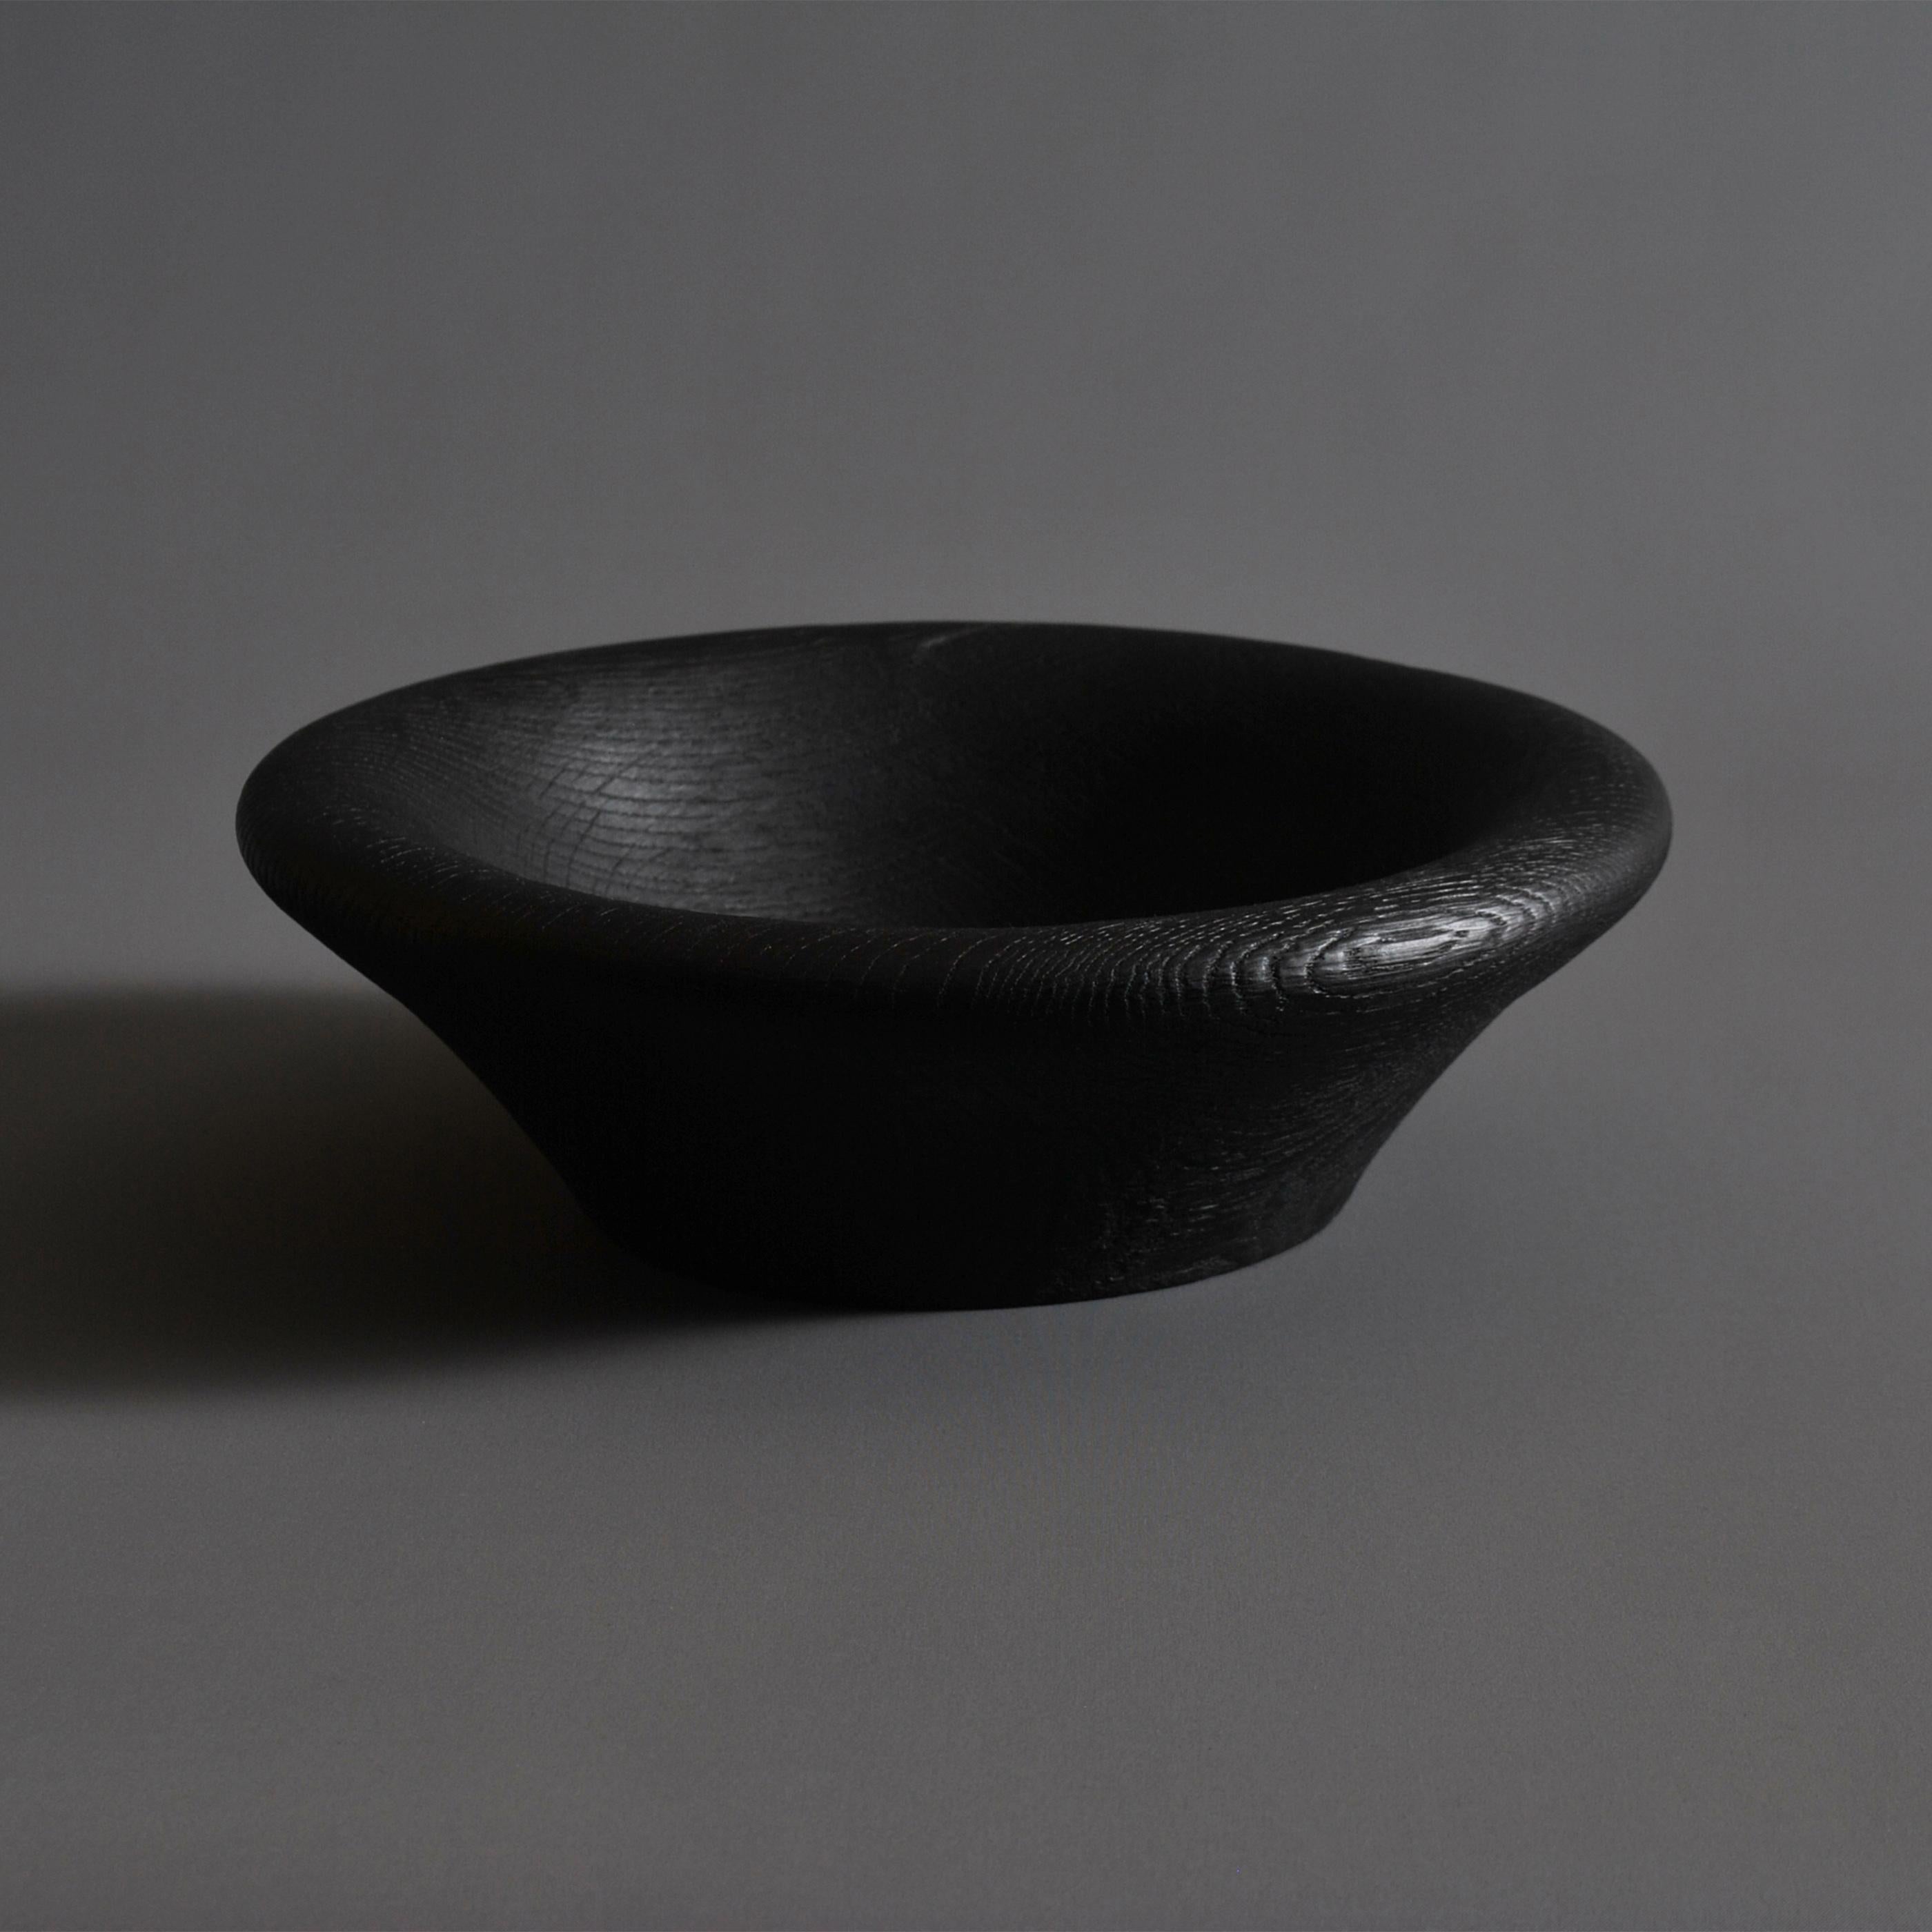 Organic and natural traditionally hand-crafted and turned Oak Japanese Yakisugi bowl. These are handmade to the very best quality in London using traditional techniques.
Finished in food safe oil.
A beautiful piece of handmade contemporary design